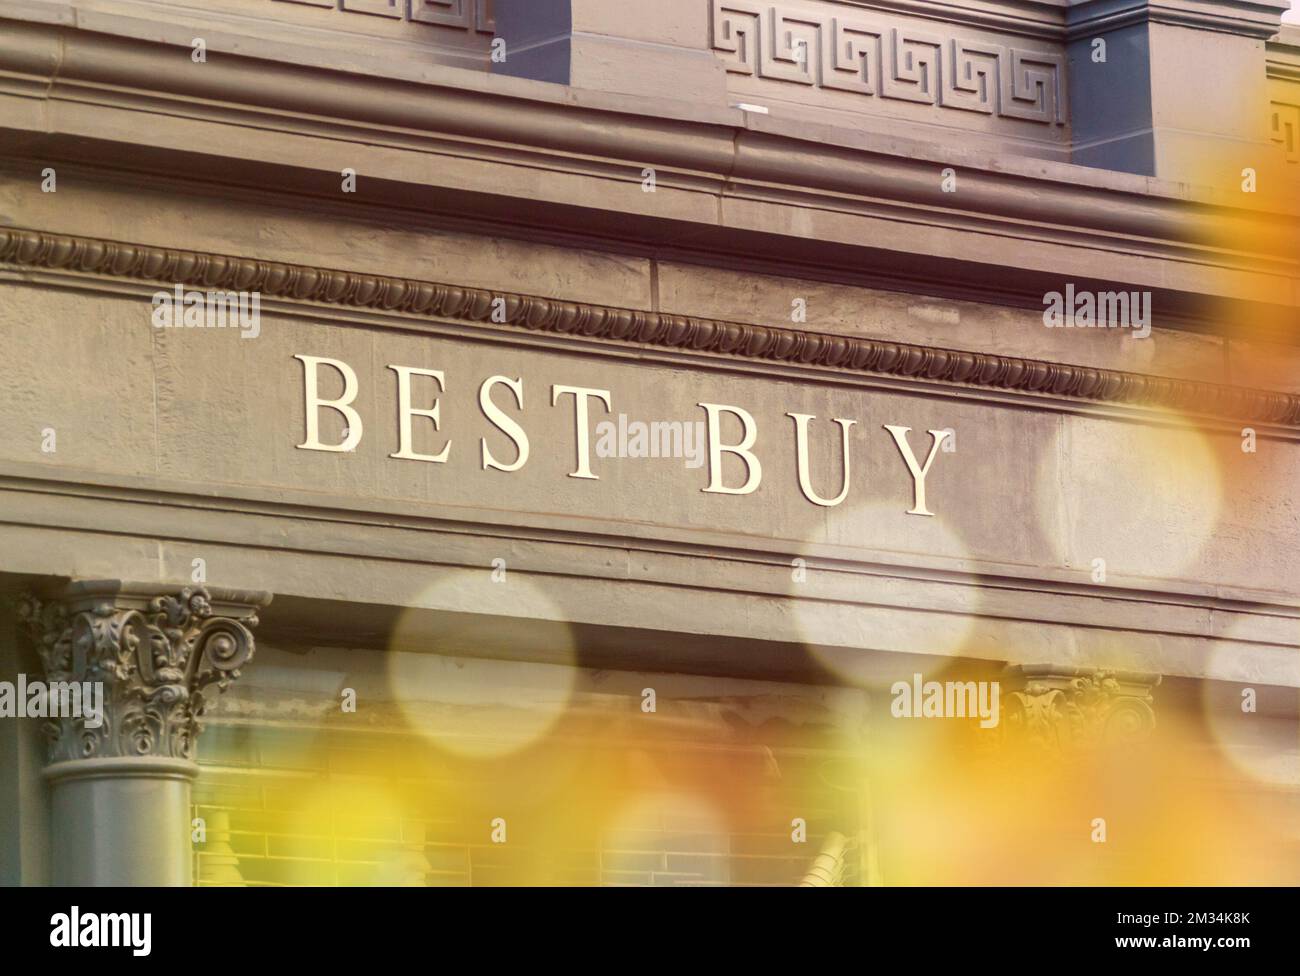 NEW YORK, USA - MAY 15, 2019: Best Buy store sign at the one of their locations Stock Photo